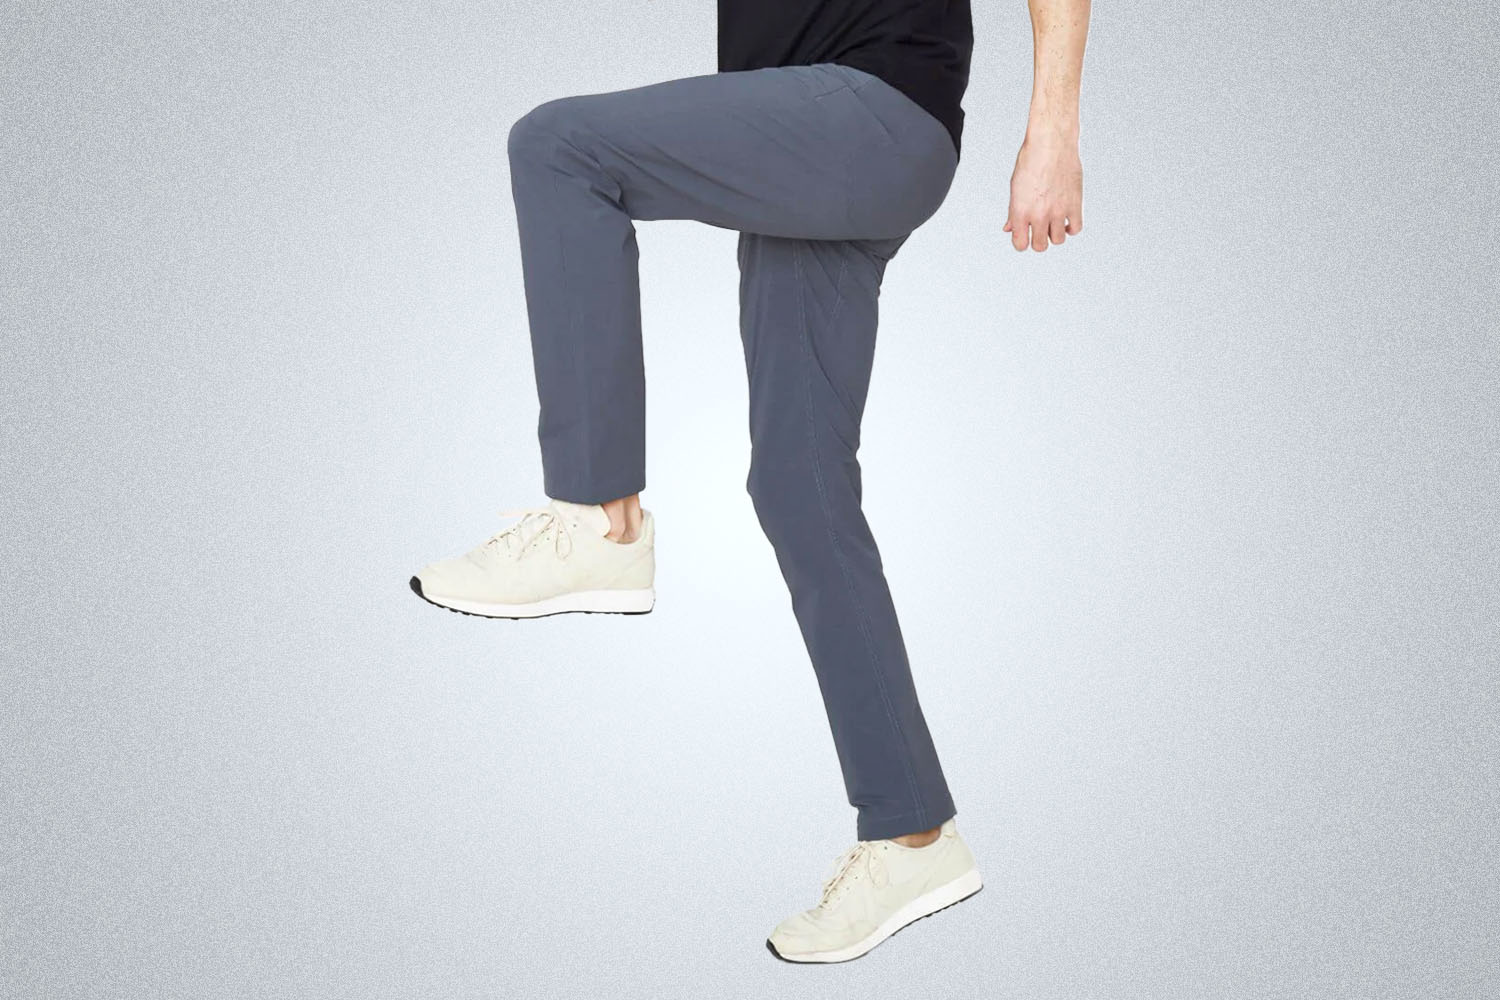 The Best Performance Pants Put the Fun in Functional - InsideHook